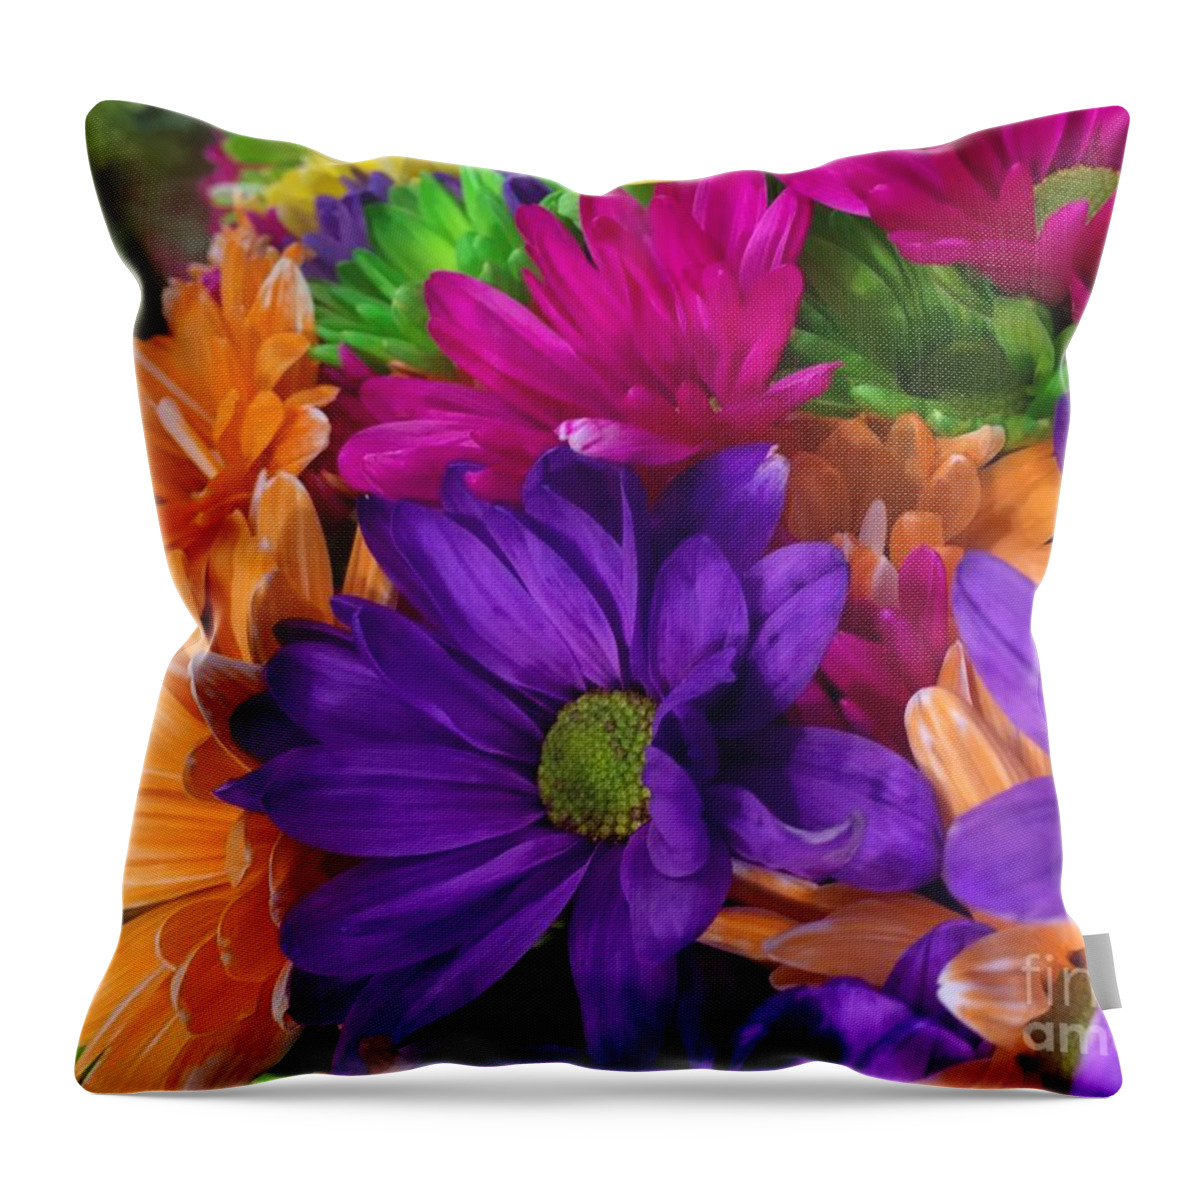 Spring Throw Pillow featuring the photograph Spring Mums by Nona Kumah